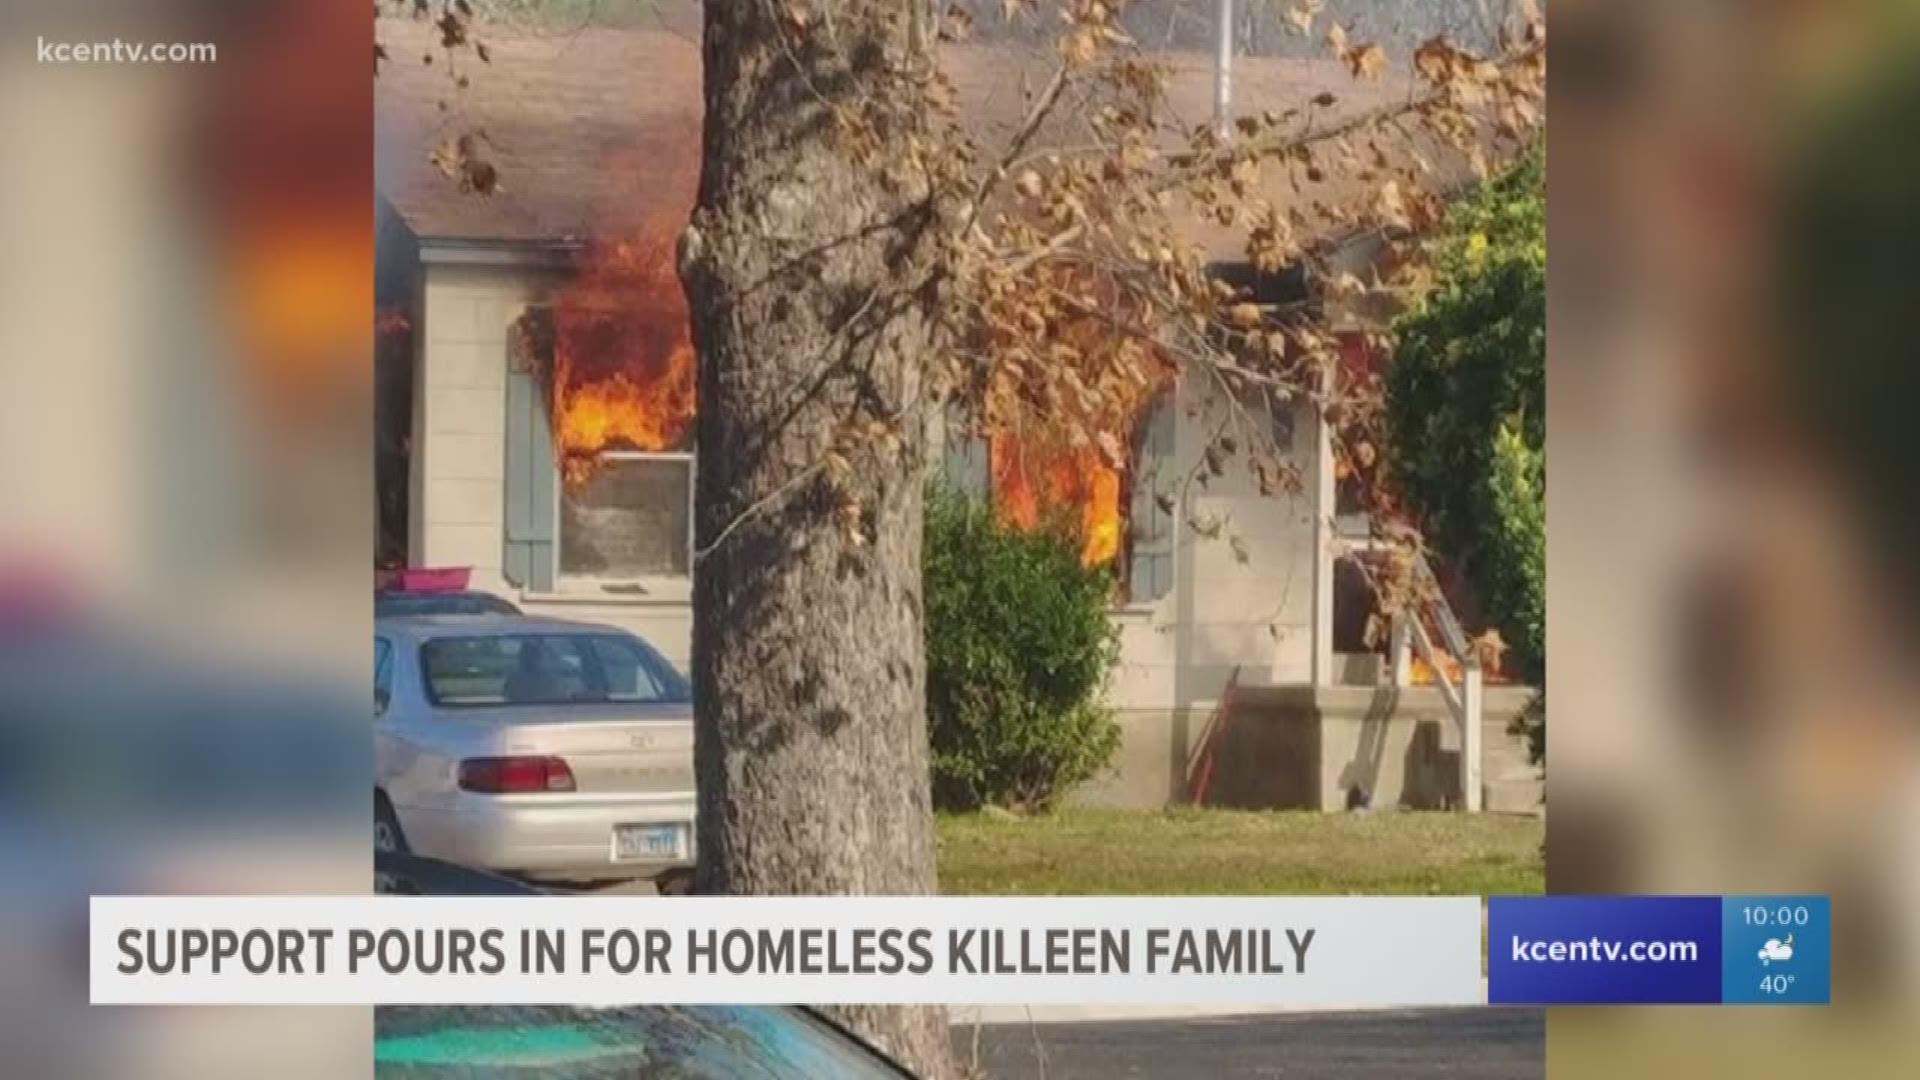 The Killeen community stepped up to help a single mother and her daughter who lost everything when a fire tore through their home Sunday.